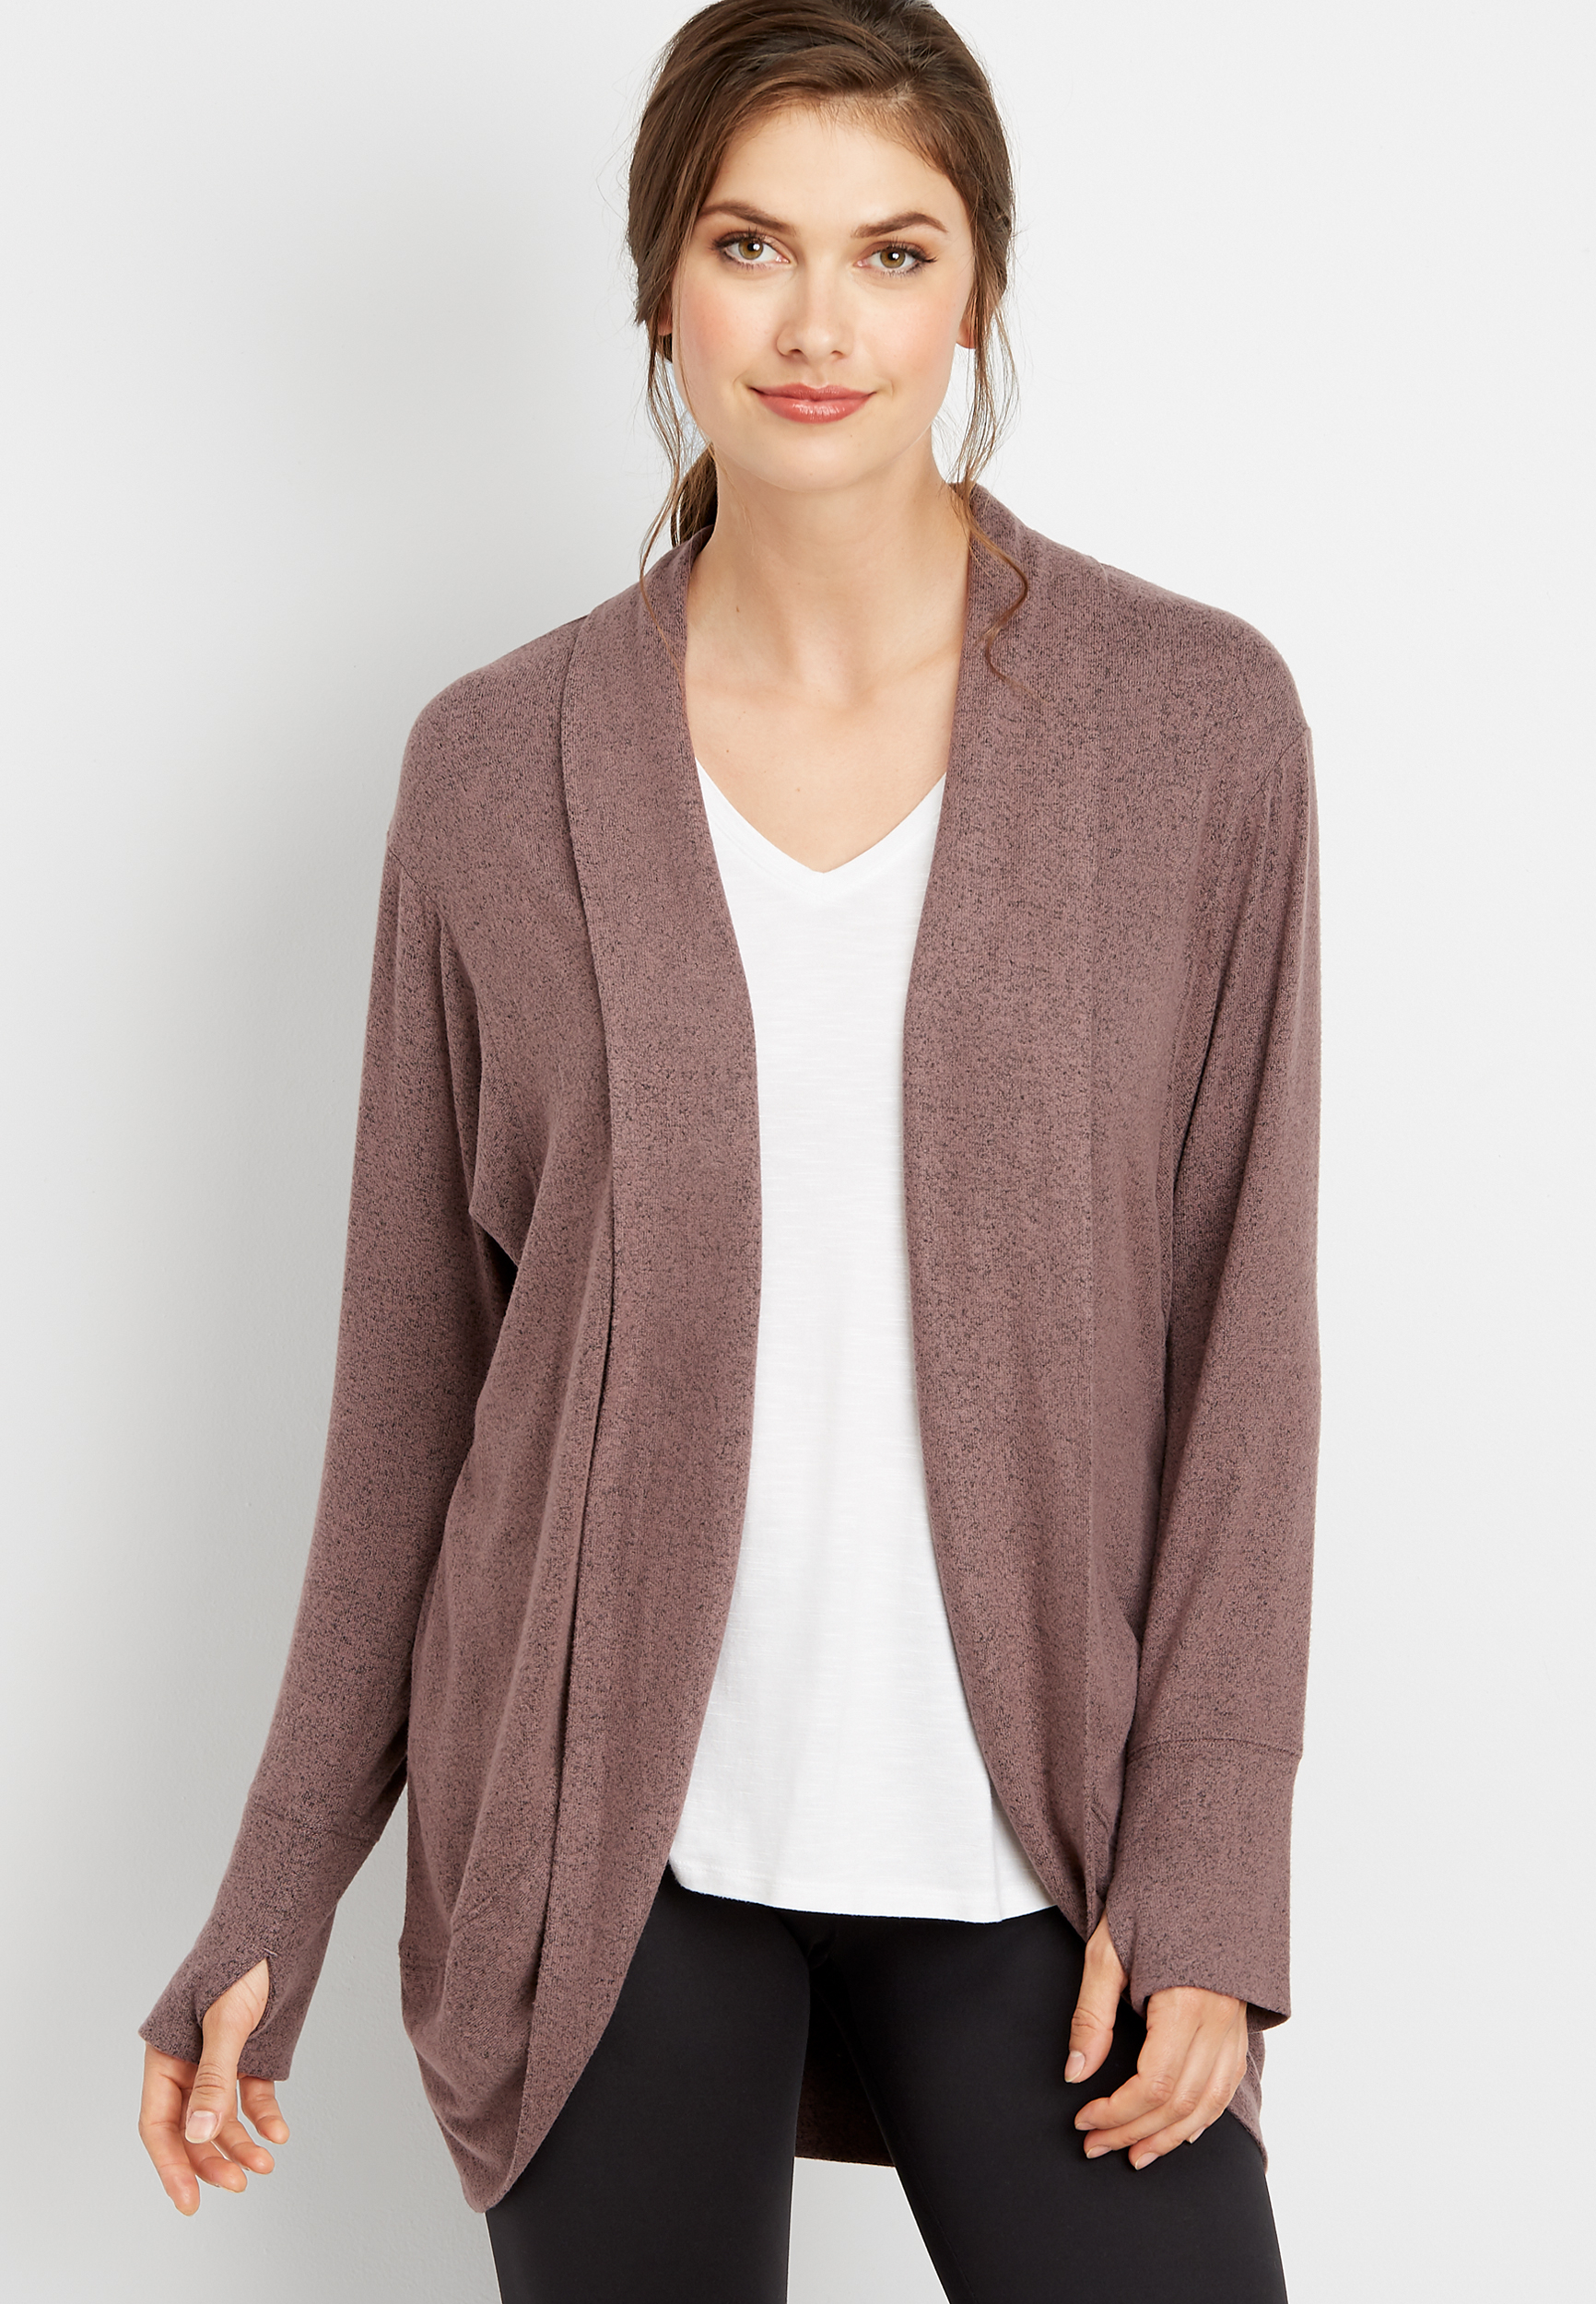 cocoon long sleeve cardigan | maurices